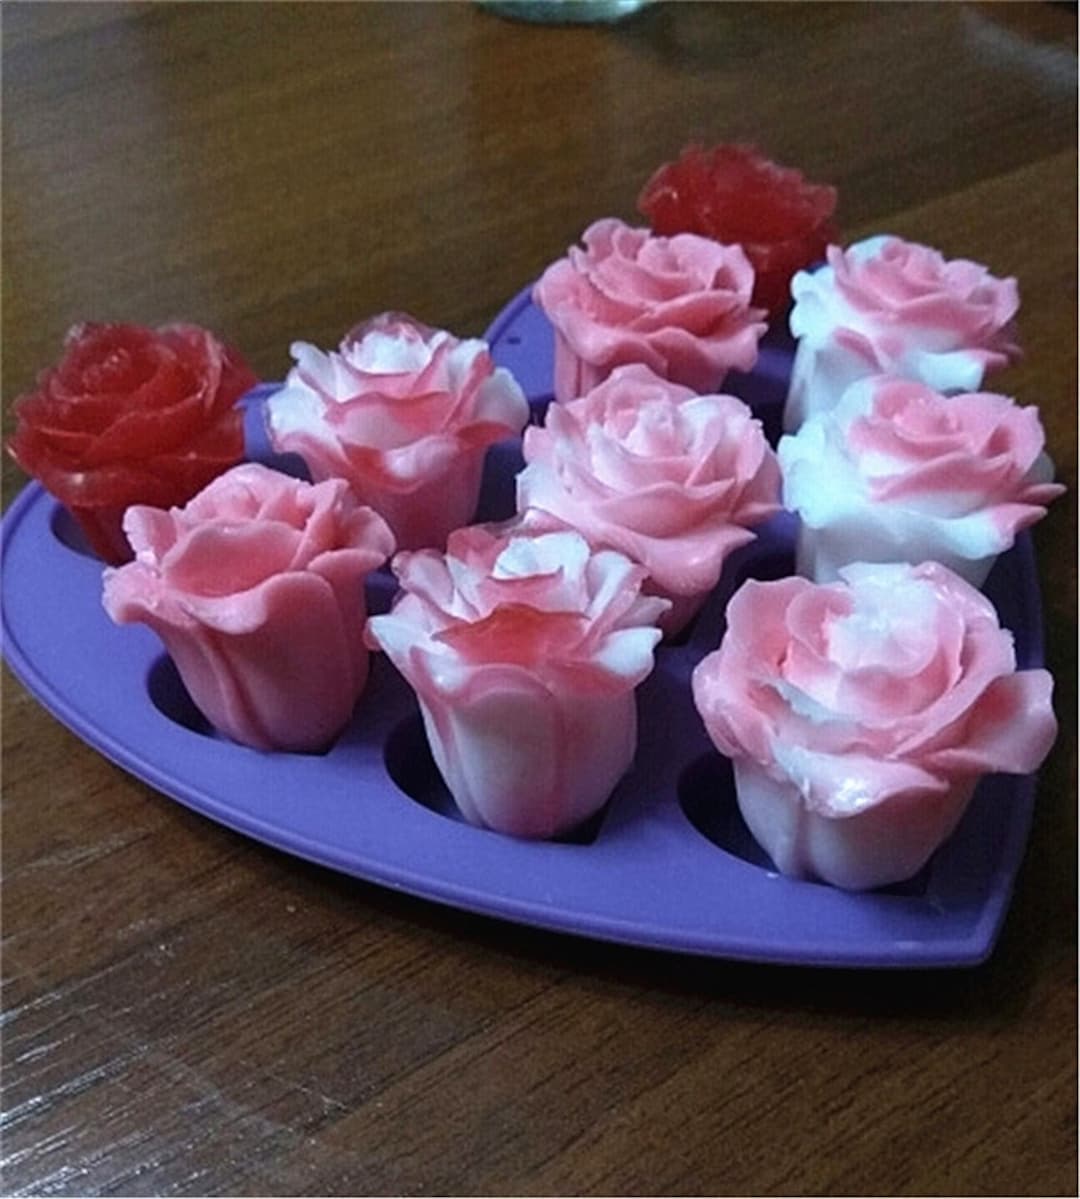 SK 3D Rose Petals Silicone Mold Fondant Chocolate Molds Baking Cookie  Moulds Soap Decorating Molds